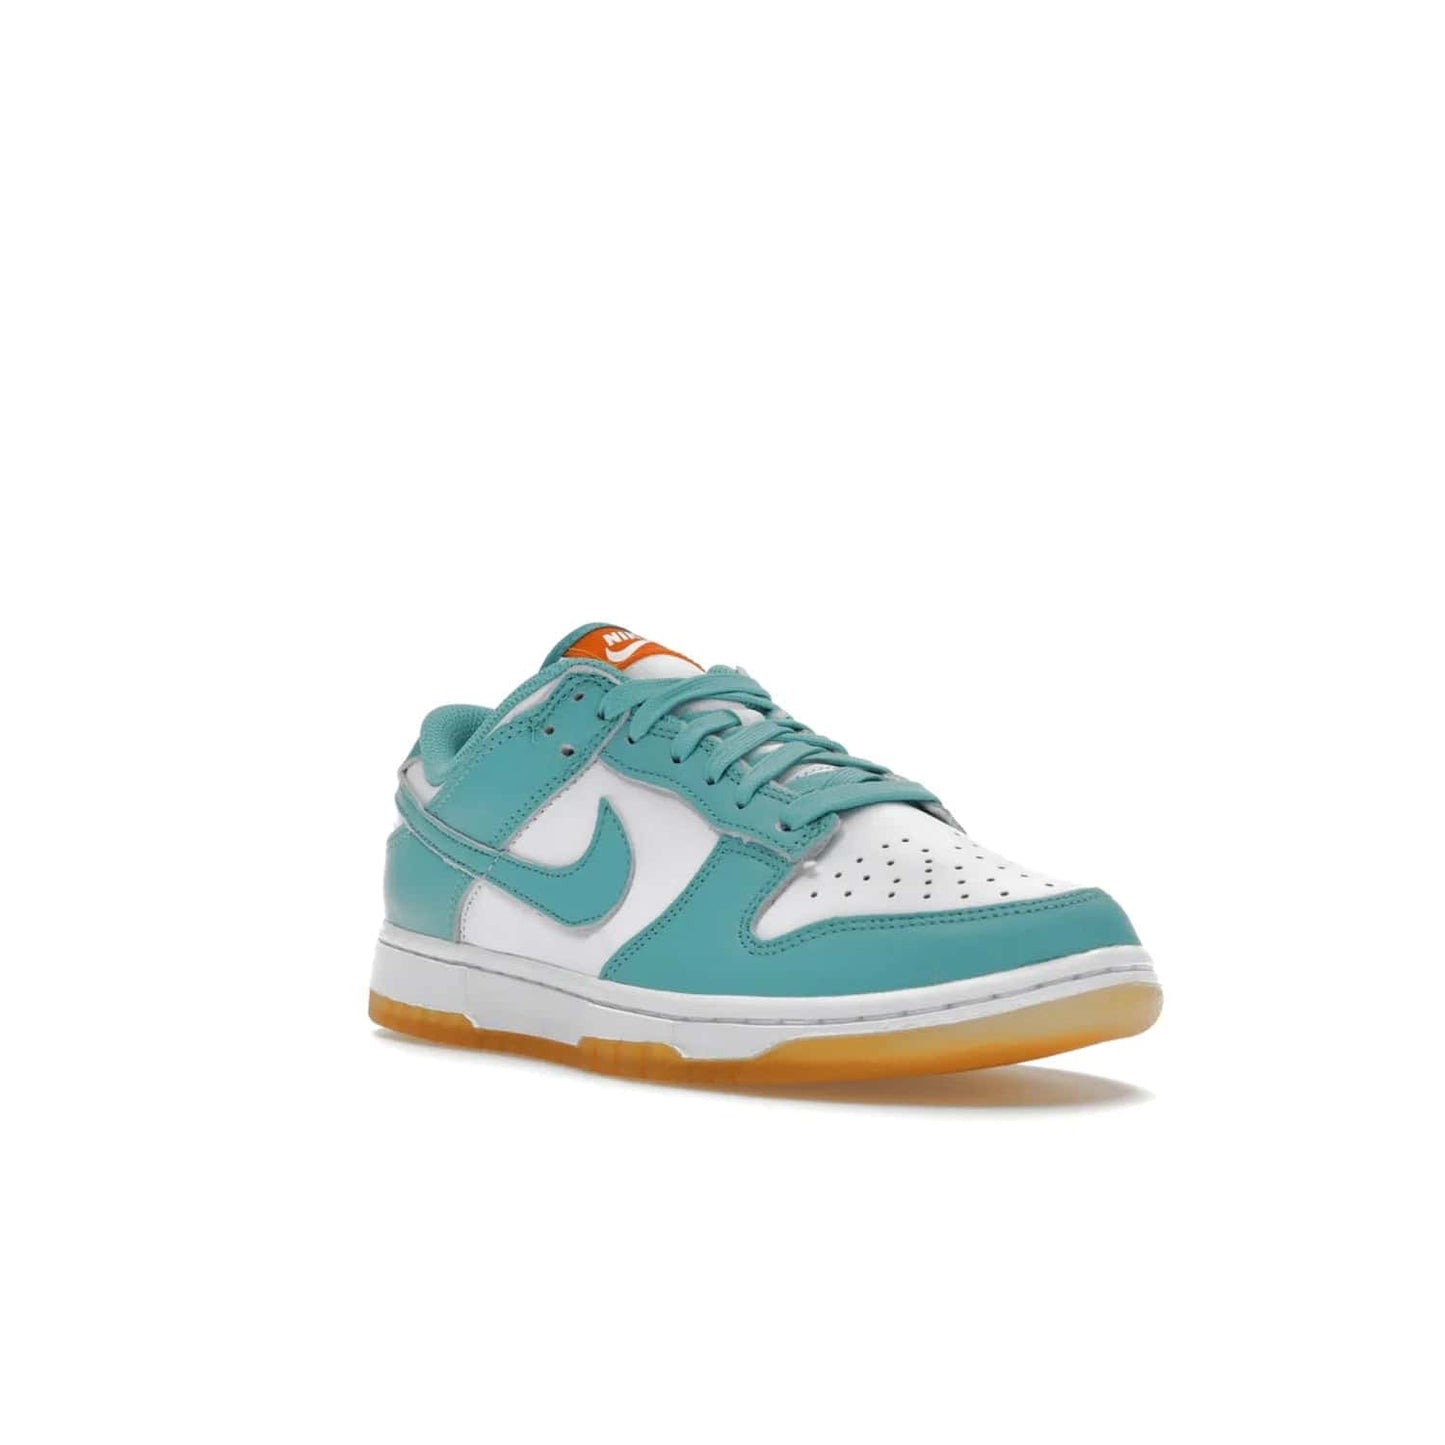 Nike Dunk Low Teal Zeal (Women's) - Image 6 - Only at www.BallersClubKickz.com - A white leather upper with teal overlays and Swooshes, plus yellow and embroidered accents make the Nike Dunk Low Teal Zeal (Women's) the perfect statement piece for any wardrobe.